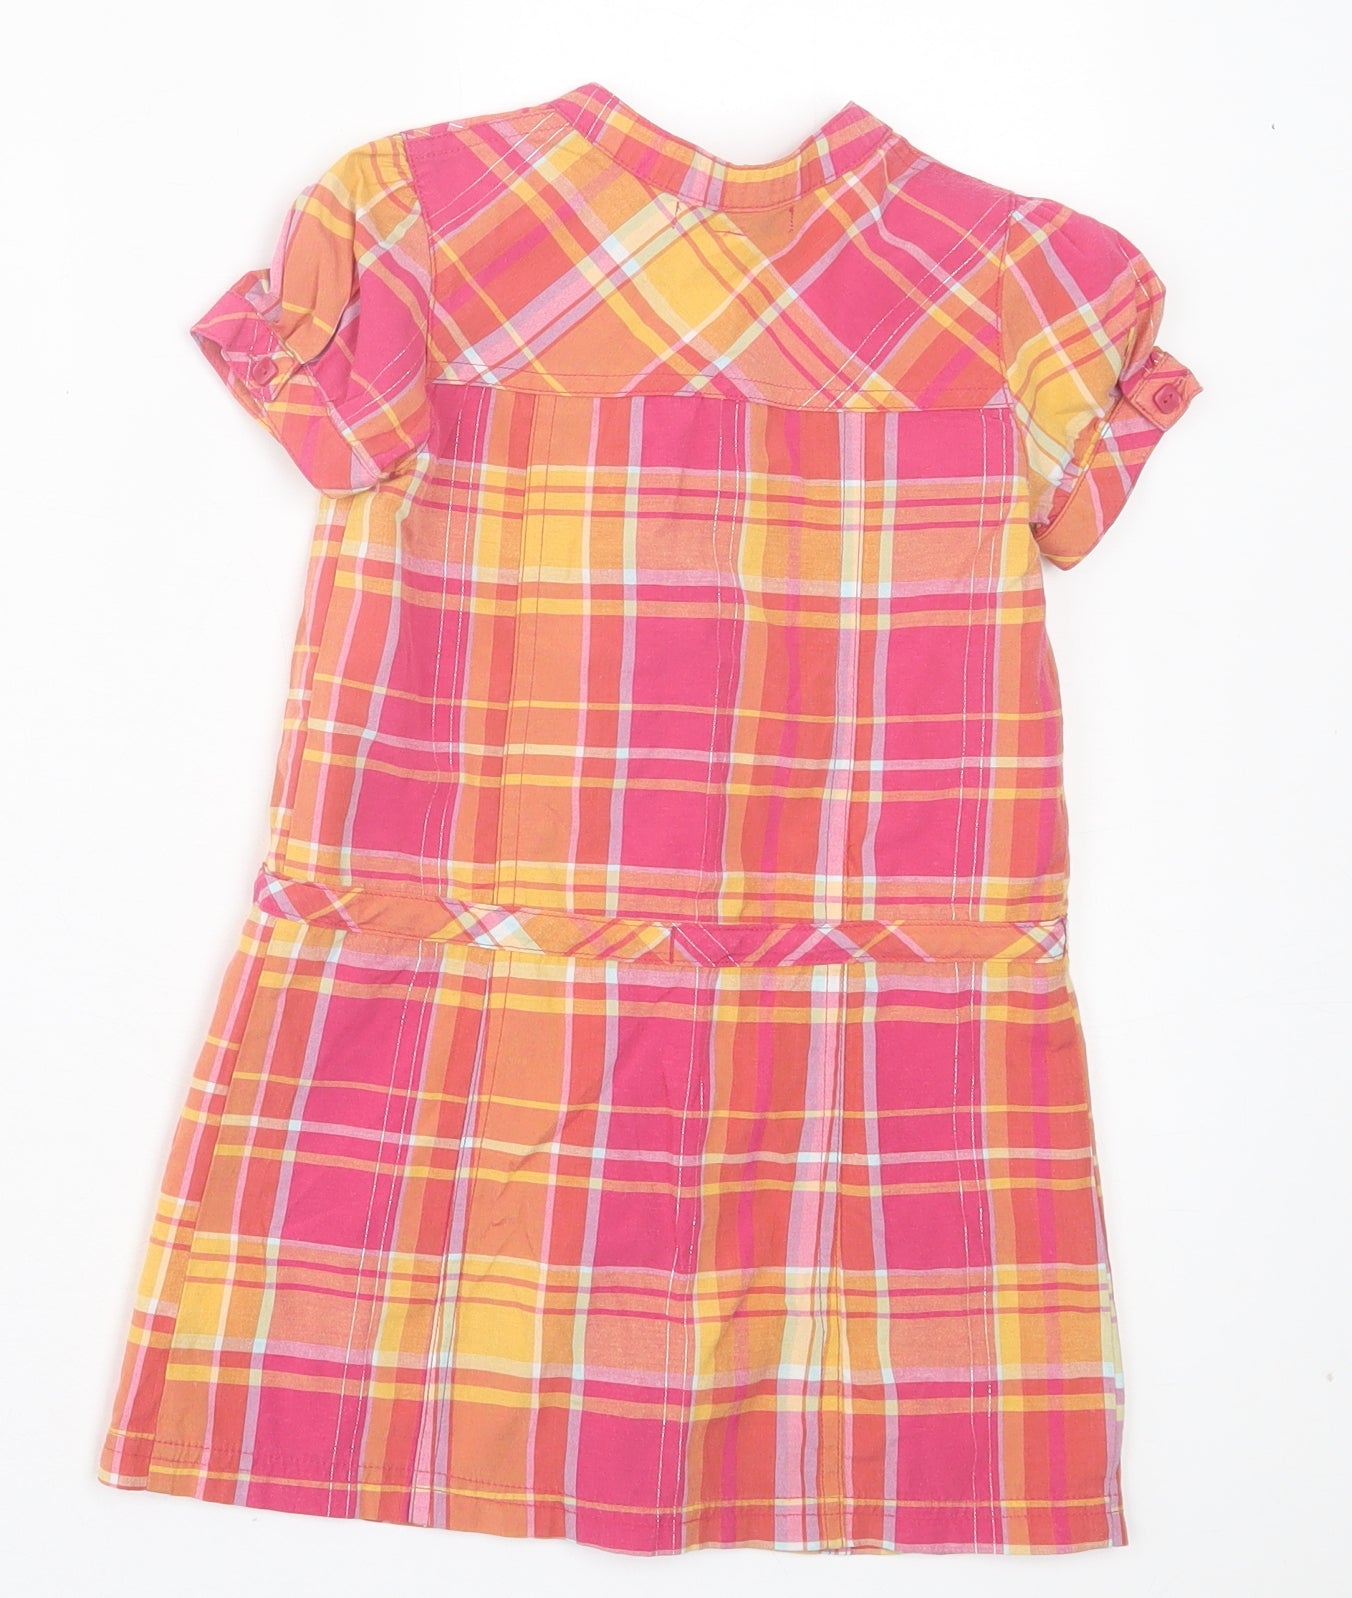 Marks and Spencer Girls Multicoloured Plaid Cotton Shirt Dress Size 3-4 Years Crew Neck Button